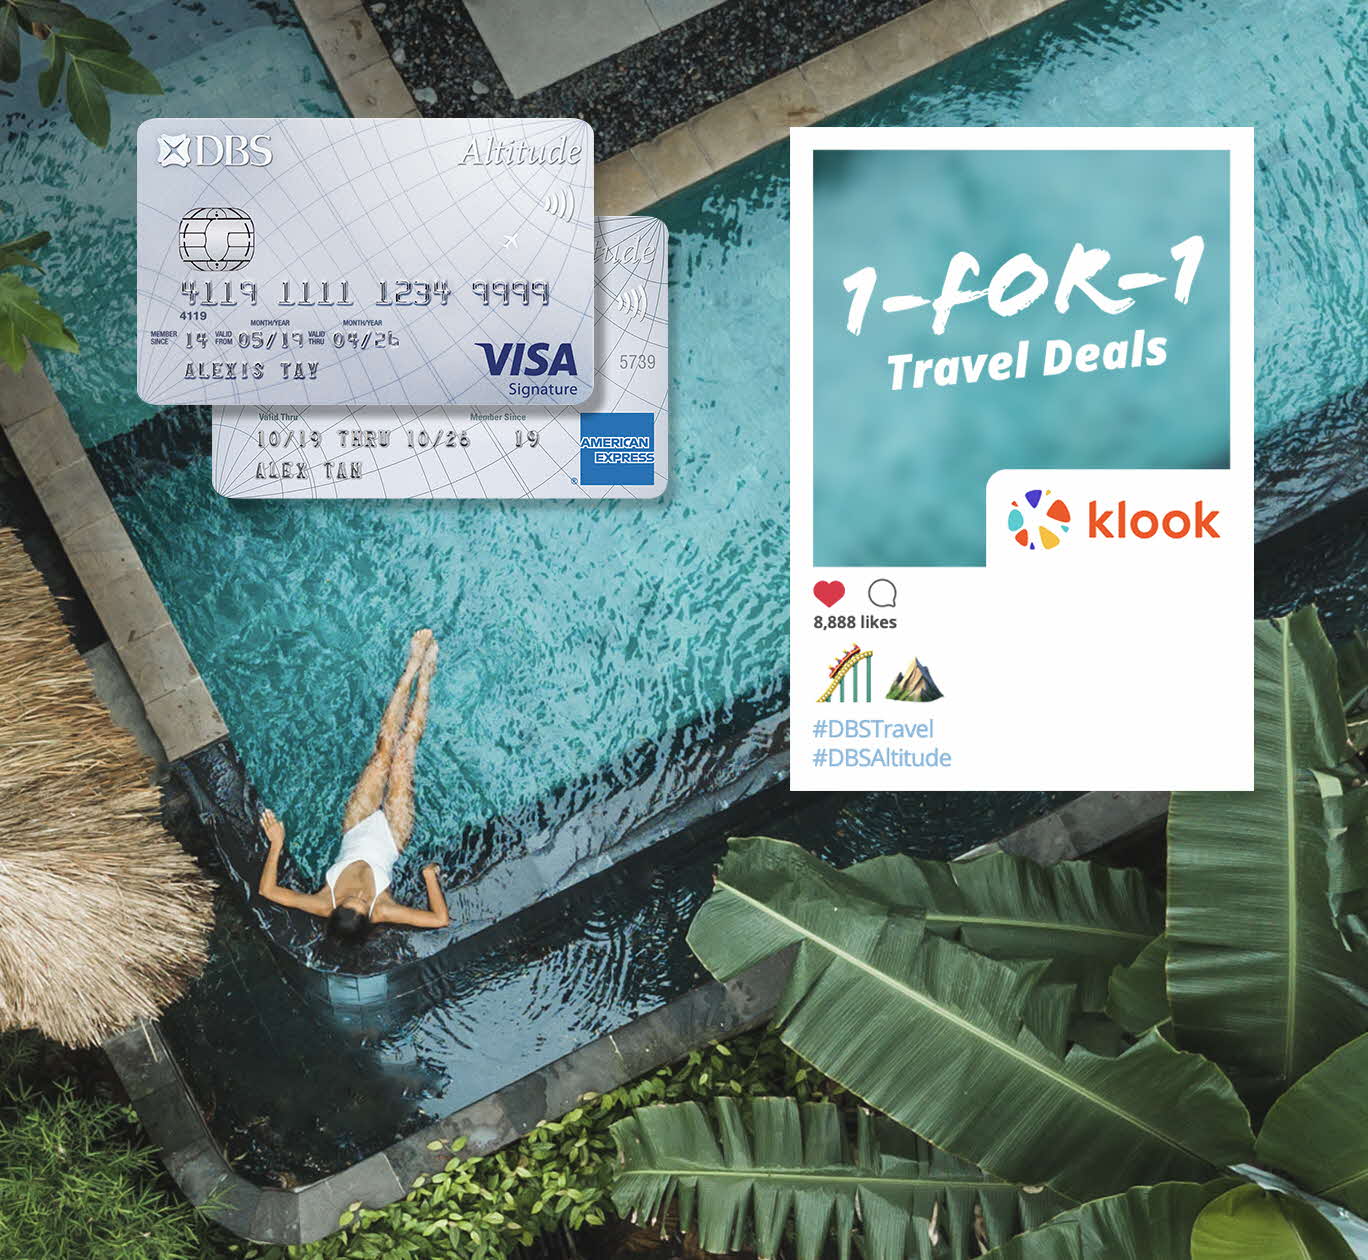 Enjoy 1-for-1 Travel Deals when you book with Klook